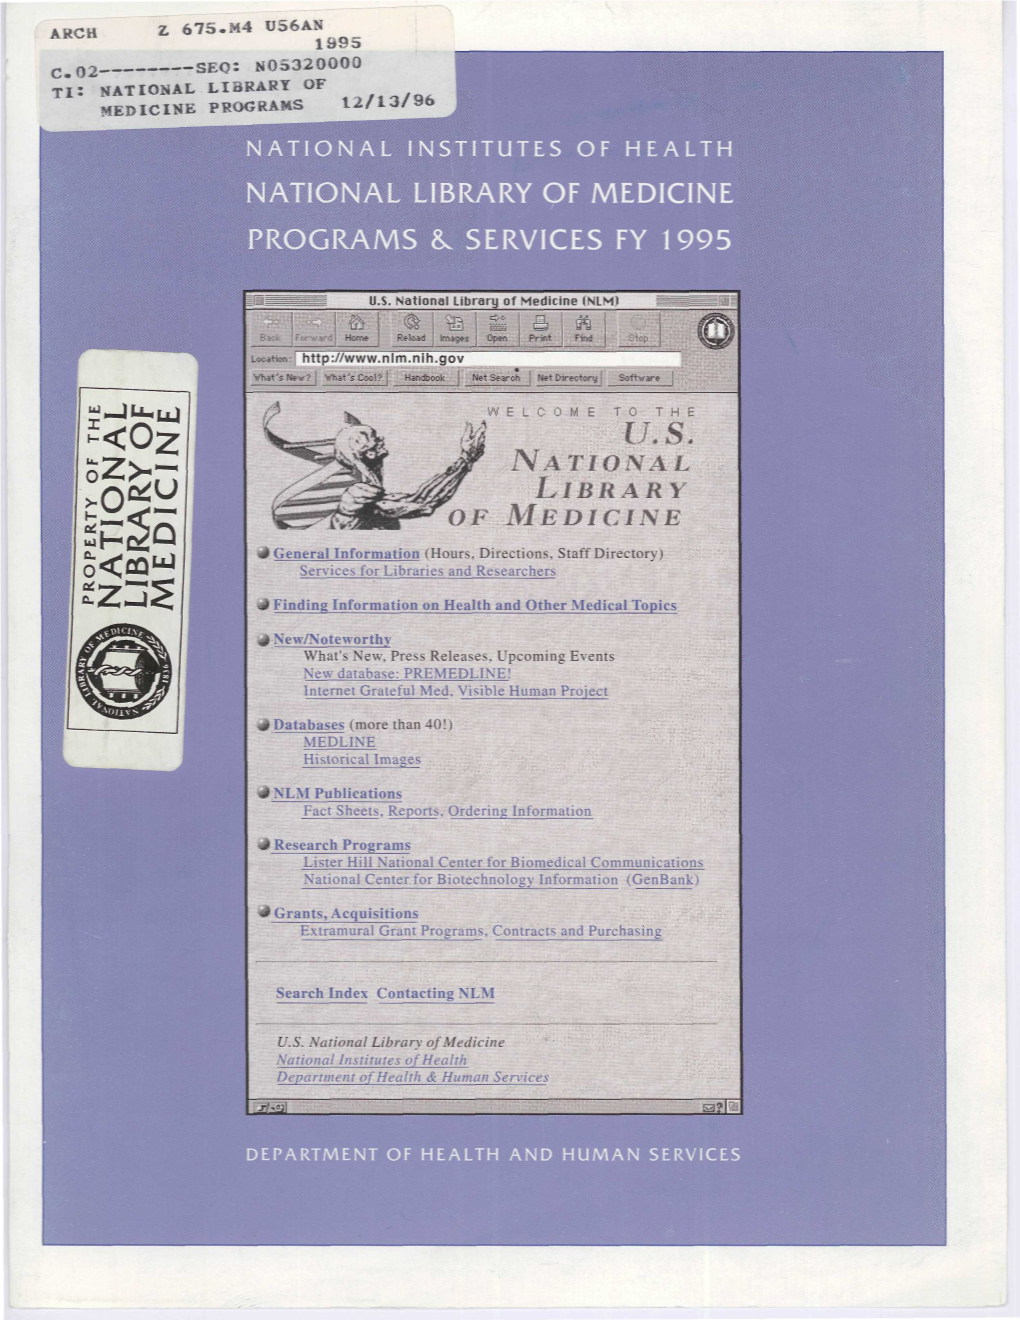 NLM Annual Report of Programs and Services, 1995